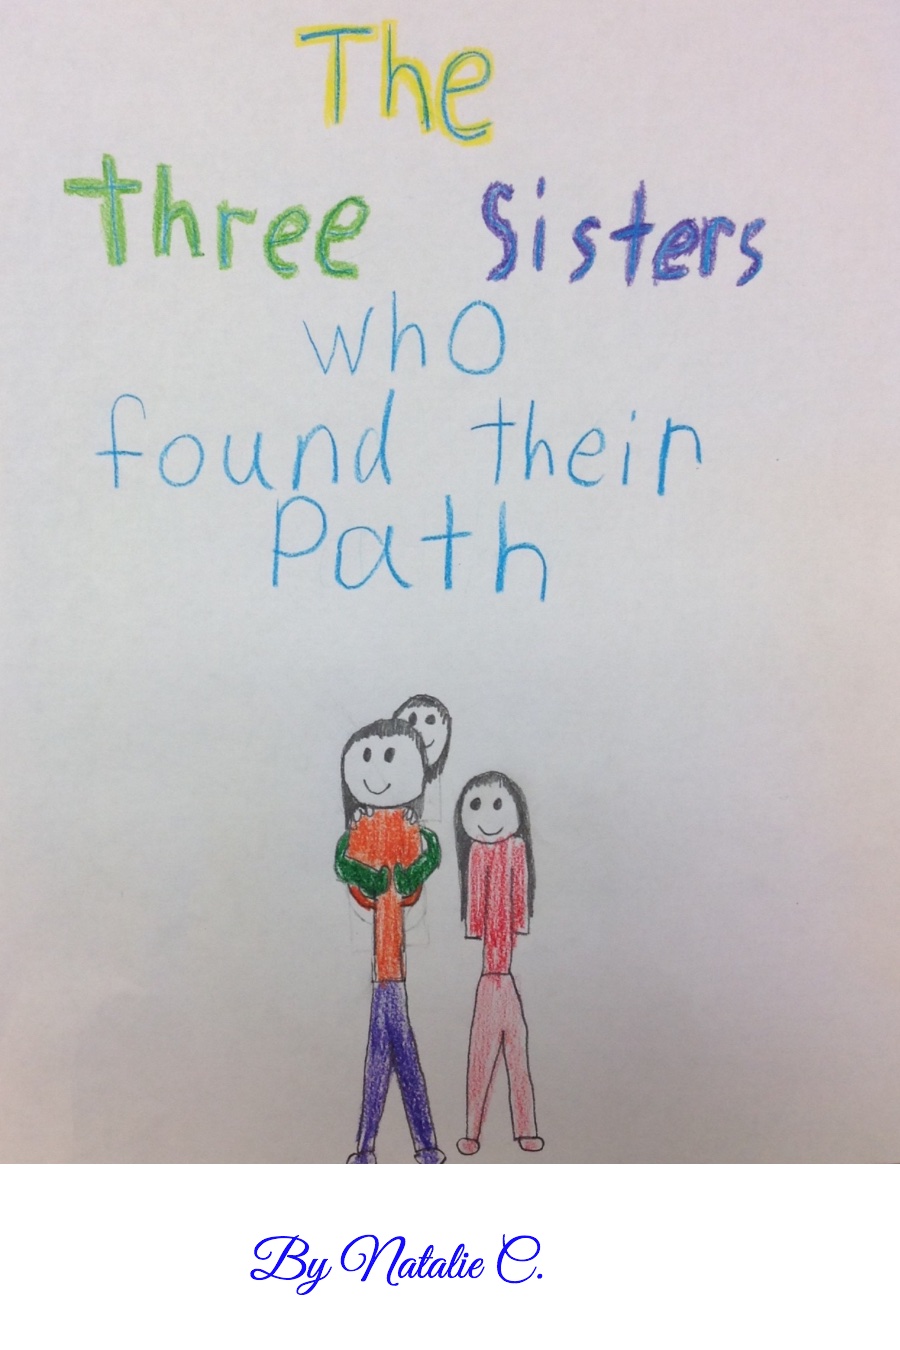 The Three Sisters Who Found Their Path by Natalie C